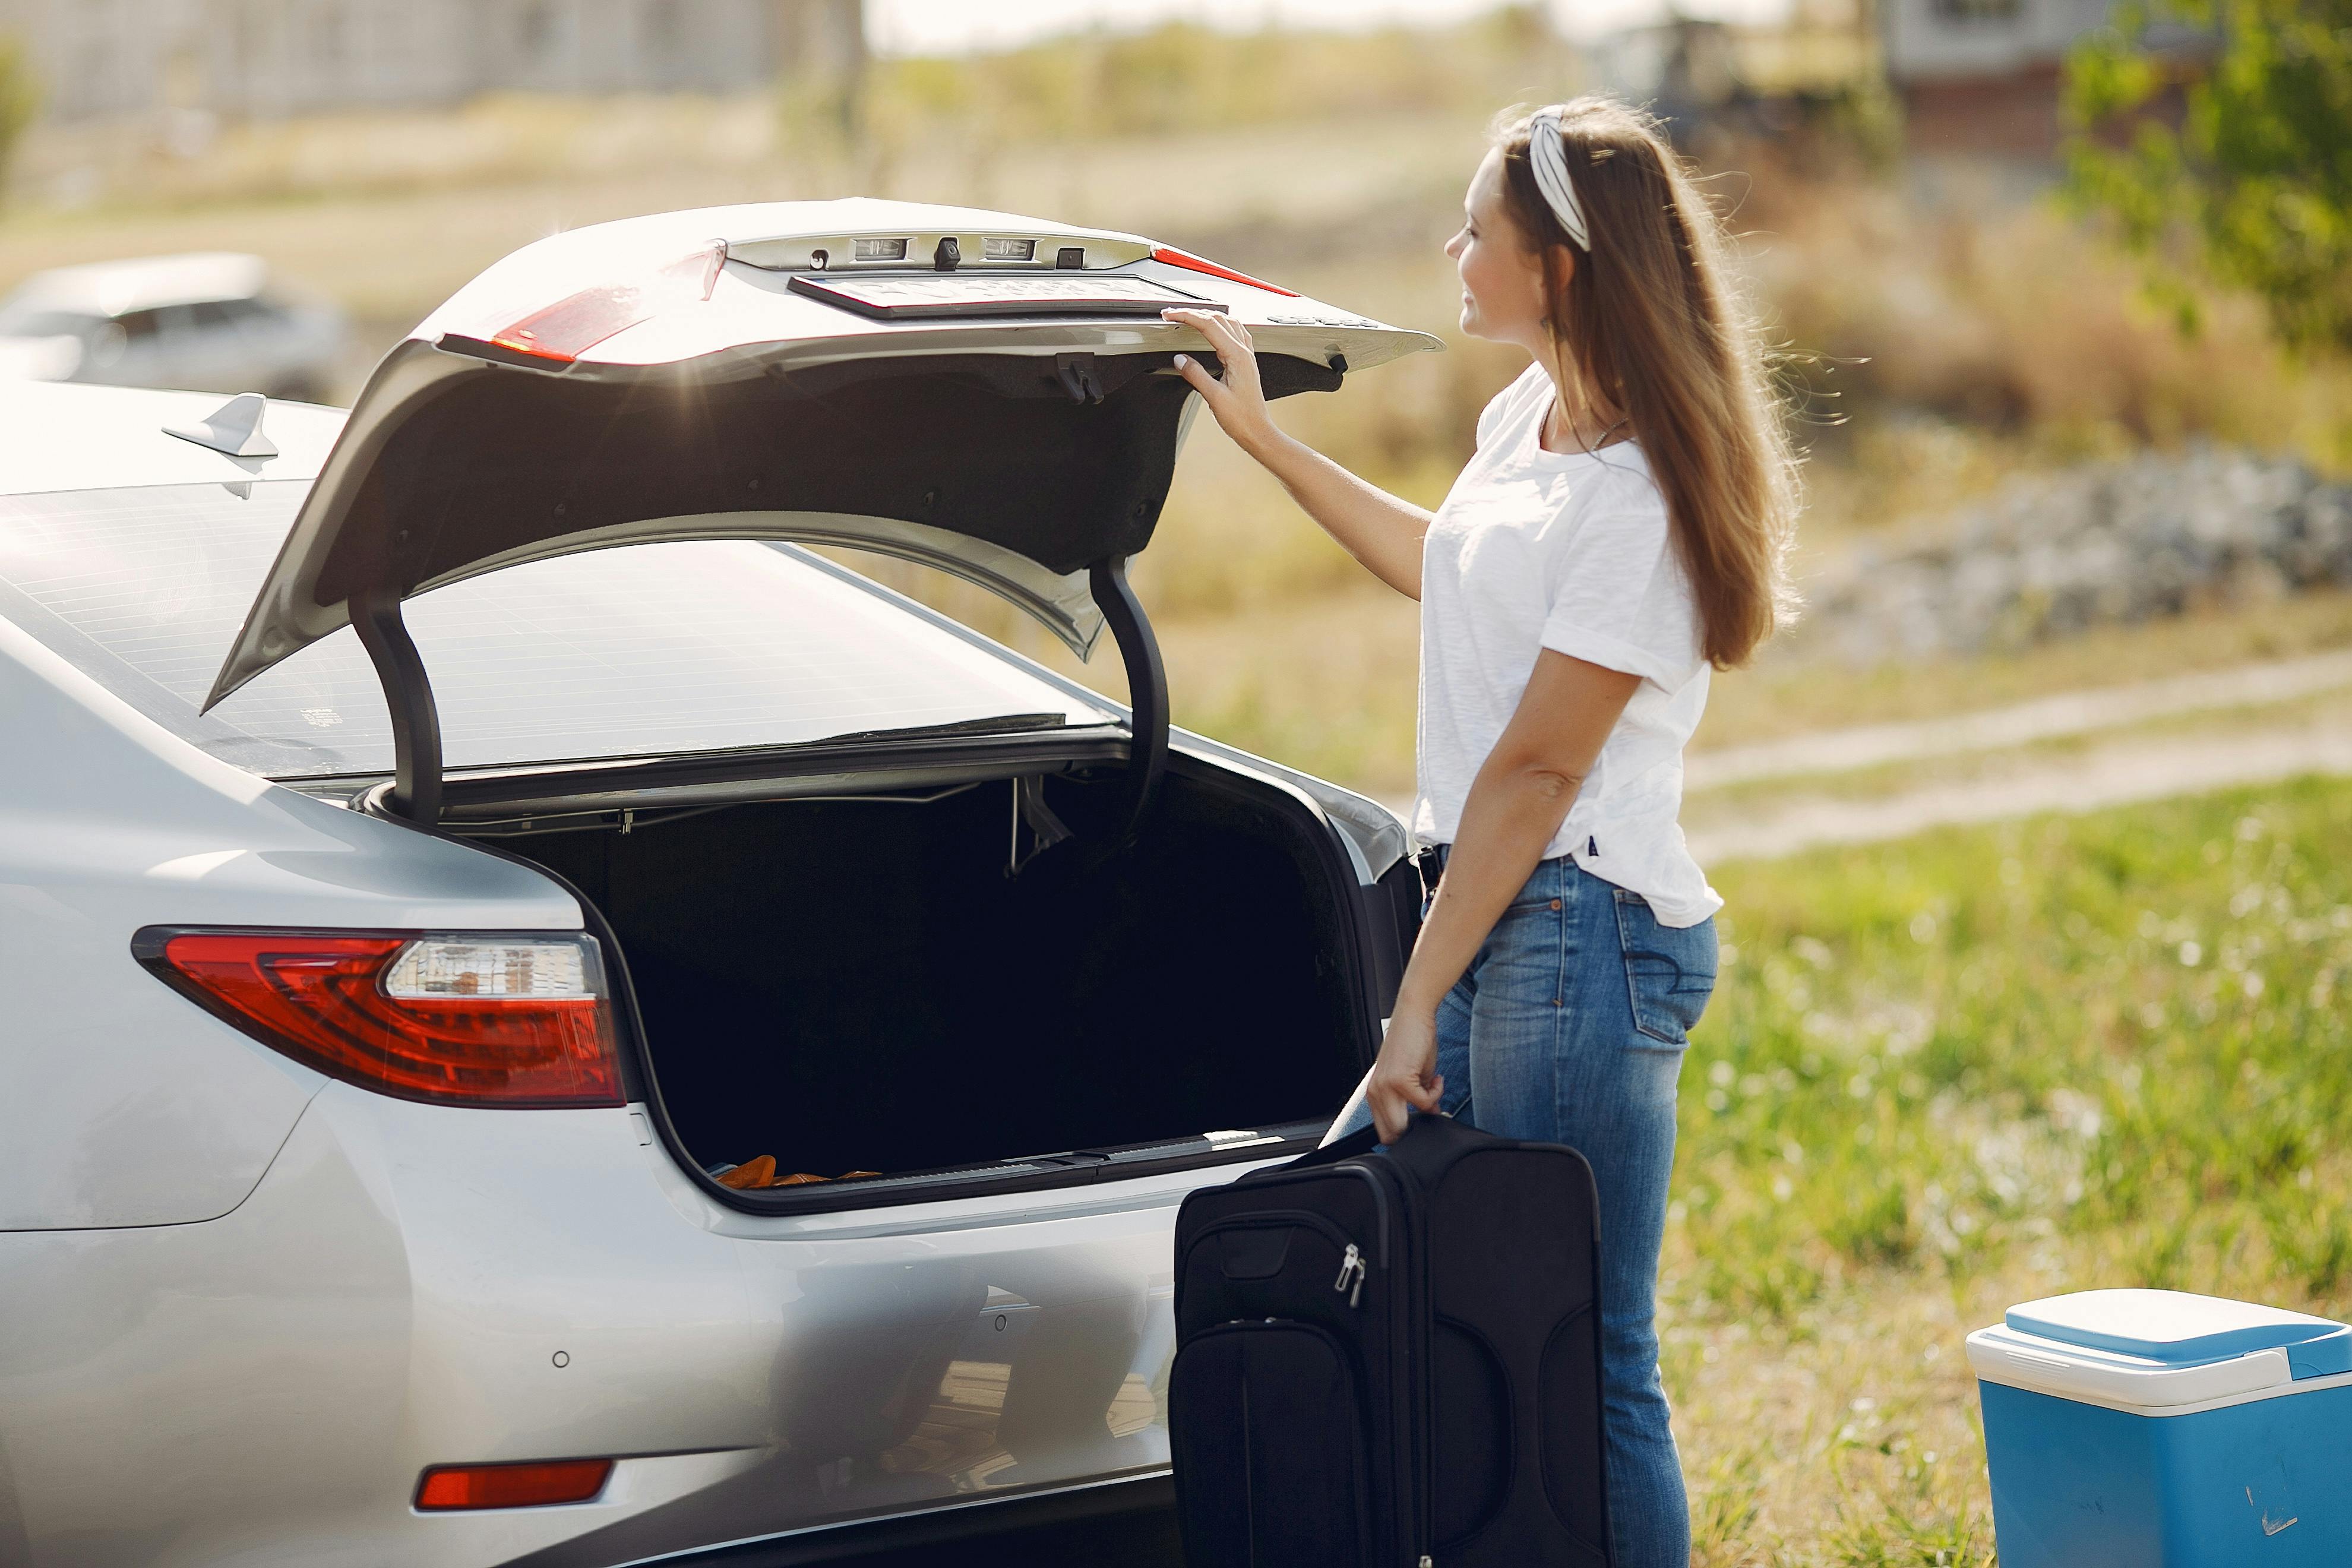 A woman standing near a car with her luggage | Source: Pexels